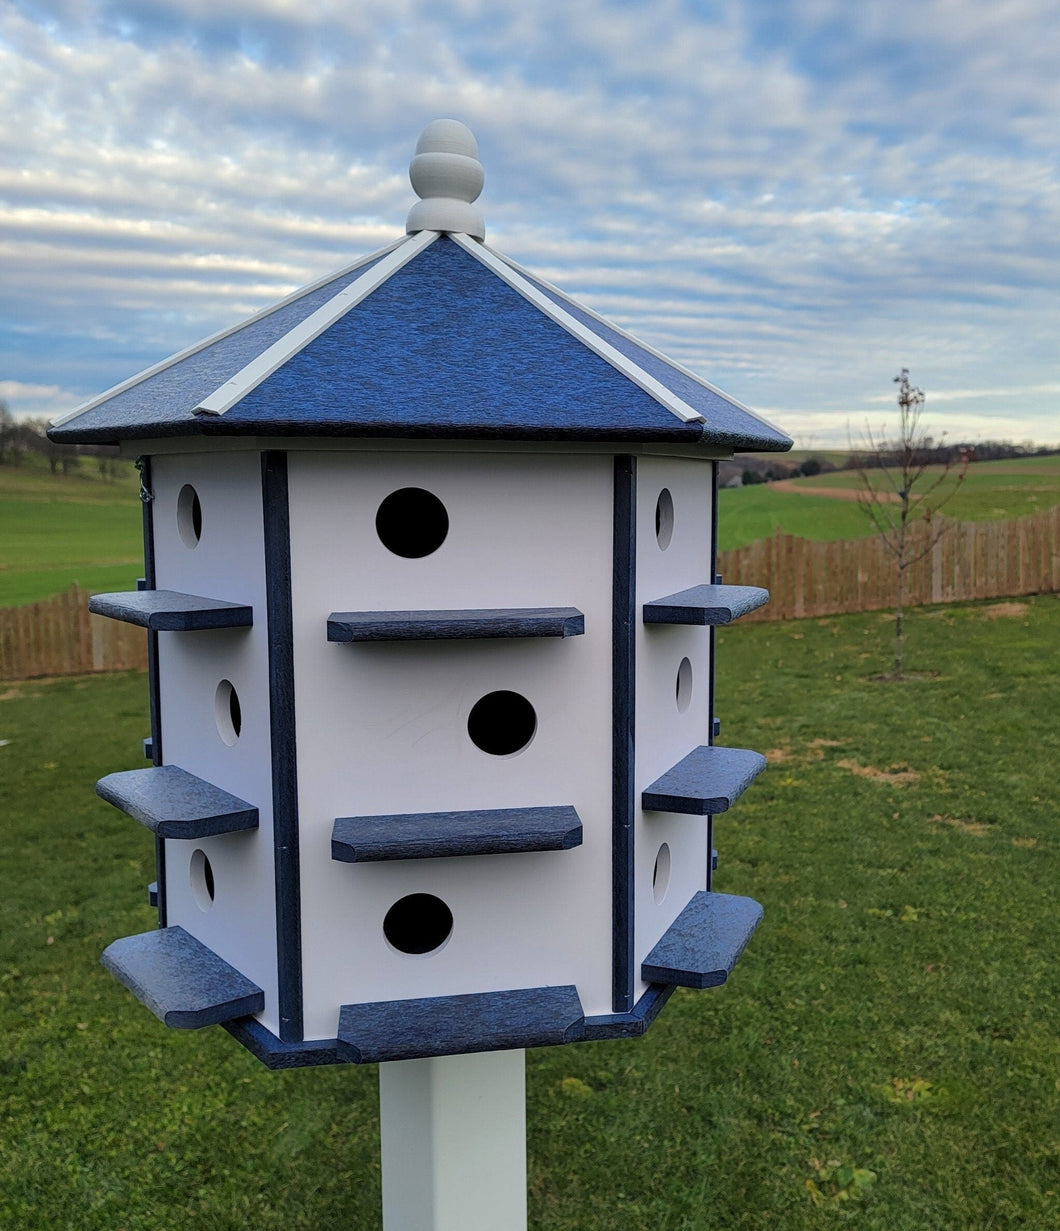 Purple Martin - Bird House - 18 Nesting Compartments - Amish Handmade - X-Large Weather Resistant - Made of Poly Lumber - Birdhouse Outdoor